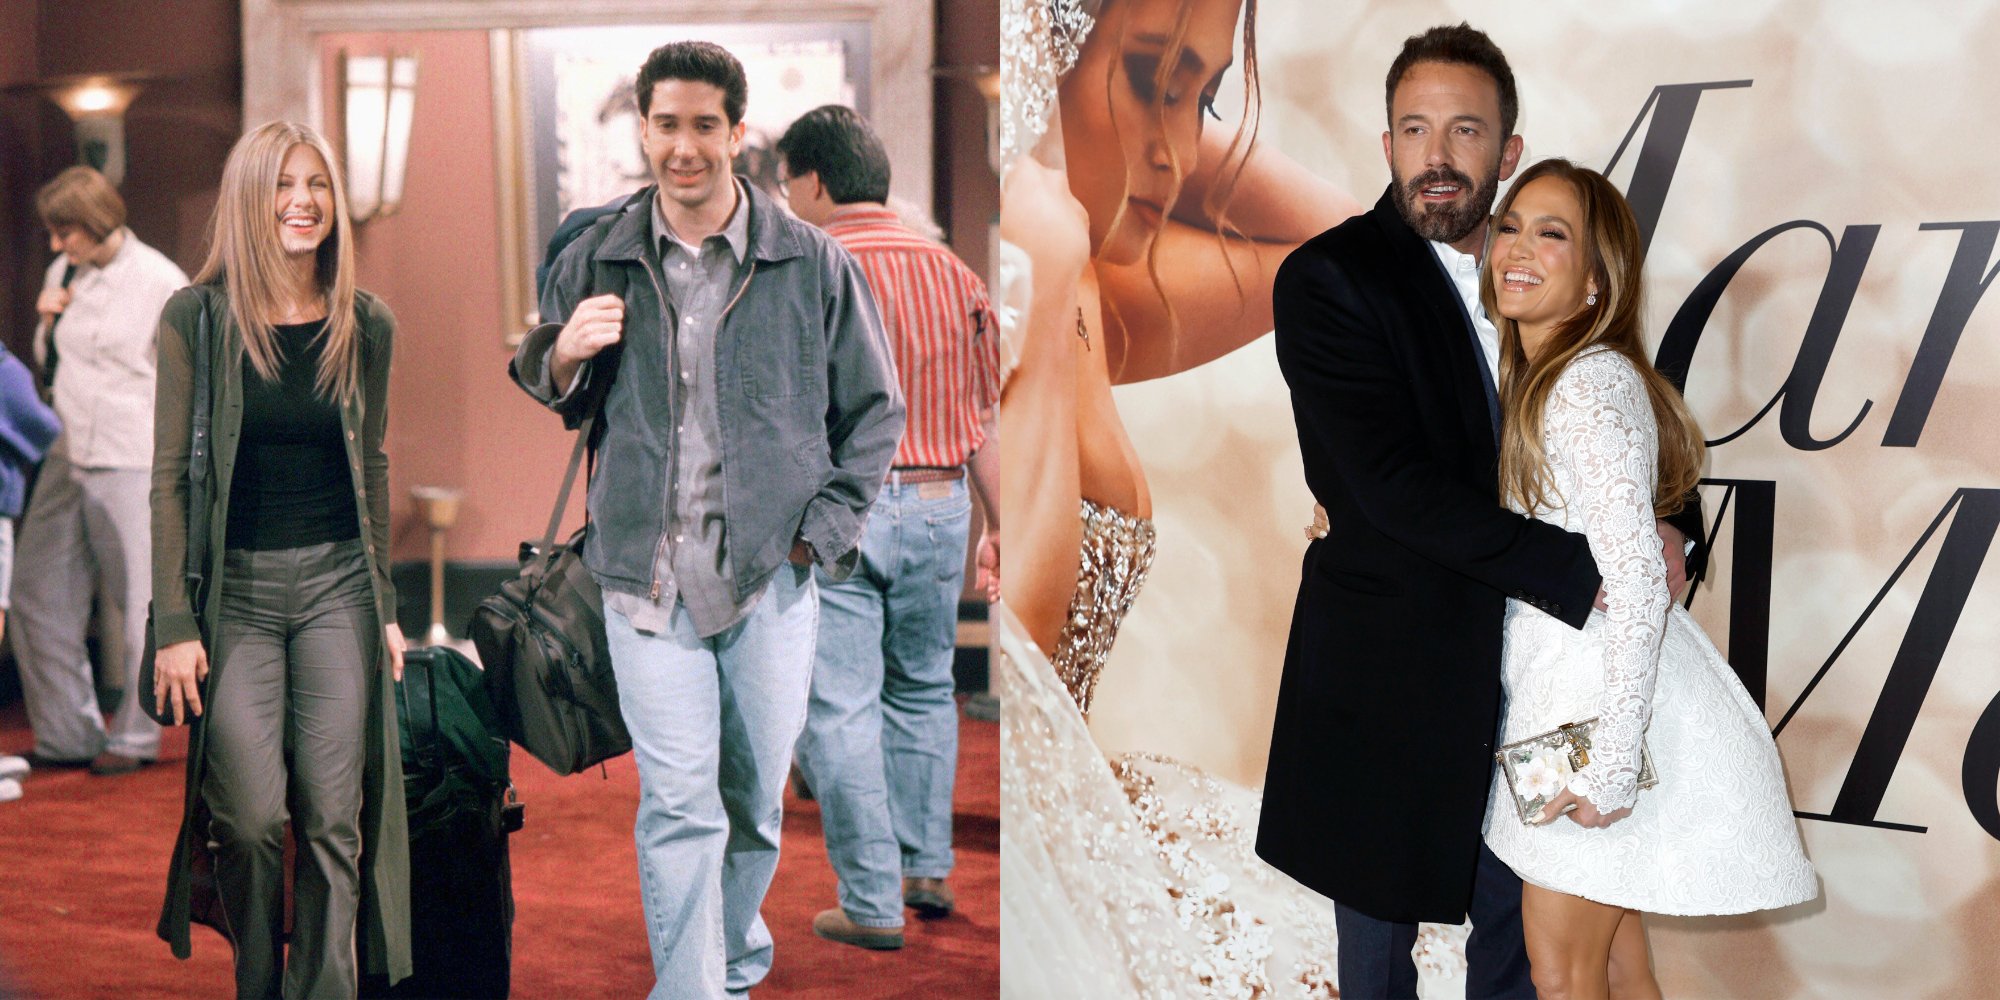 'Friends' stars Jennifer Aniston and David Schwimmer in a side by side photo with Ben Affleck and Jennifer Lopez.